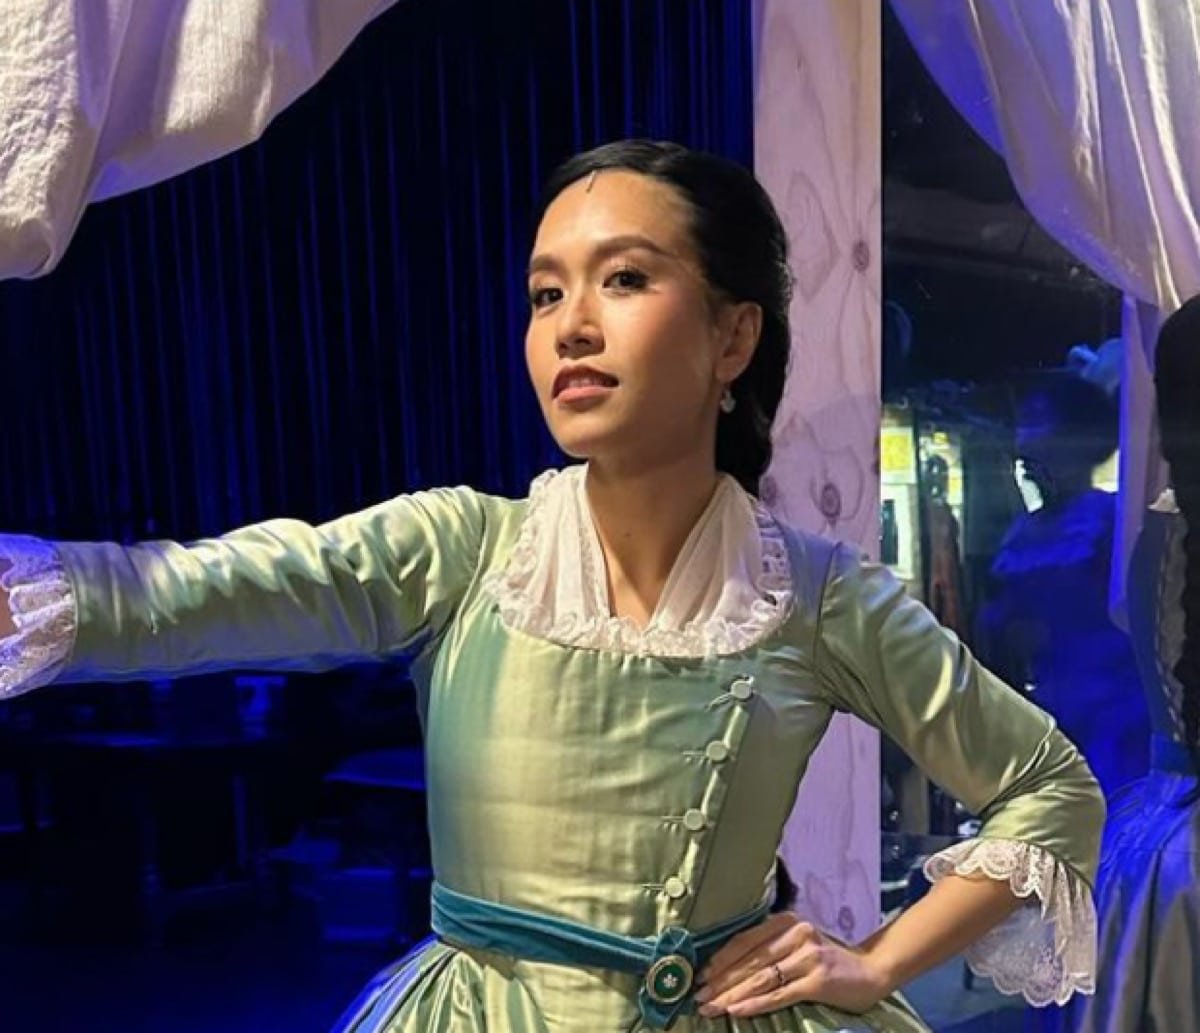 Rachelle Ann Go back on Hamilton stage after bout with pneumonia